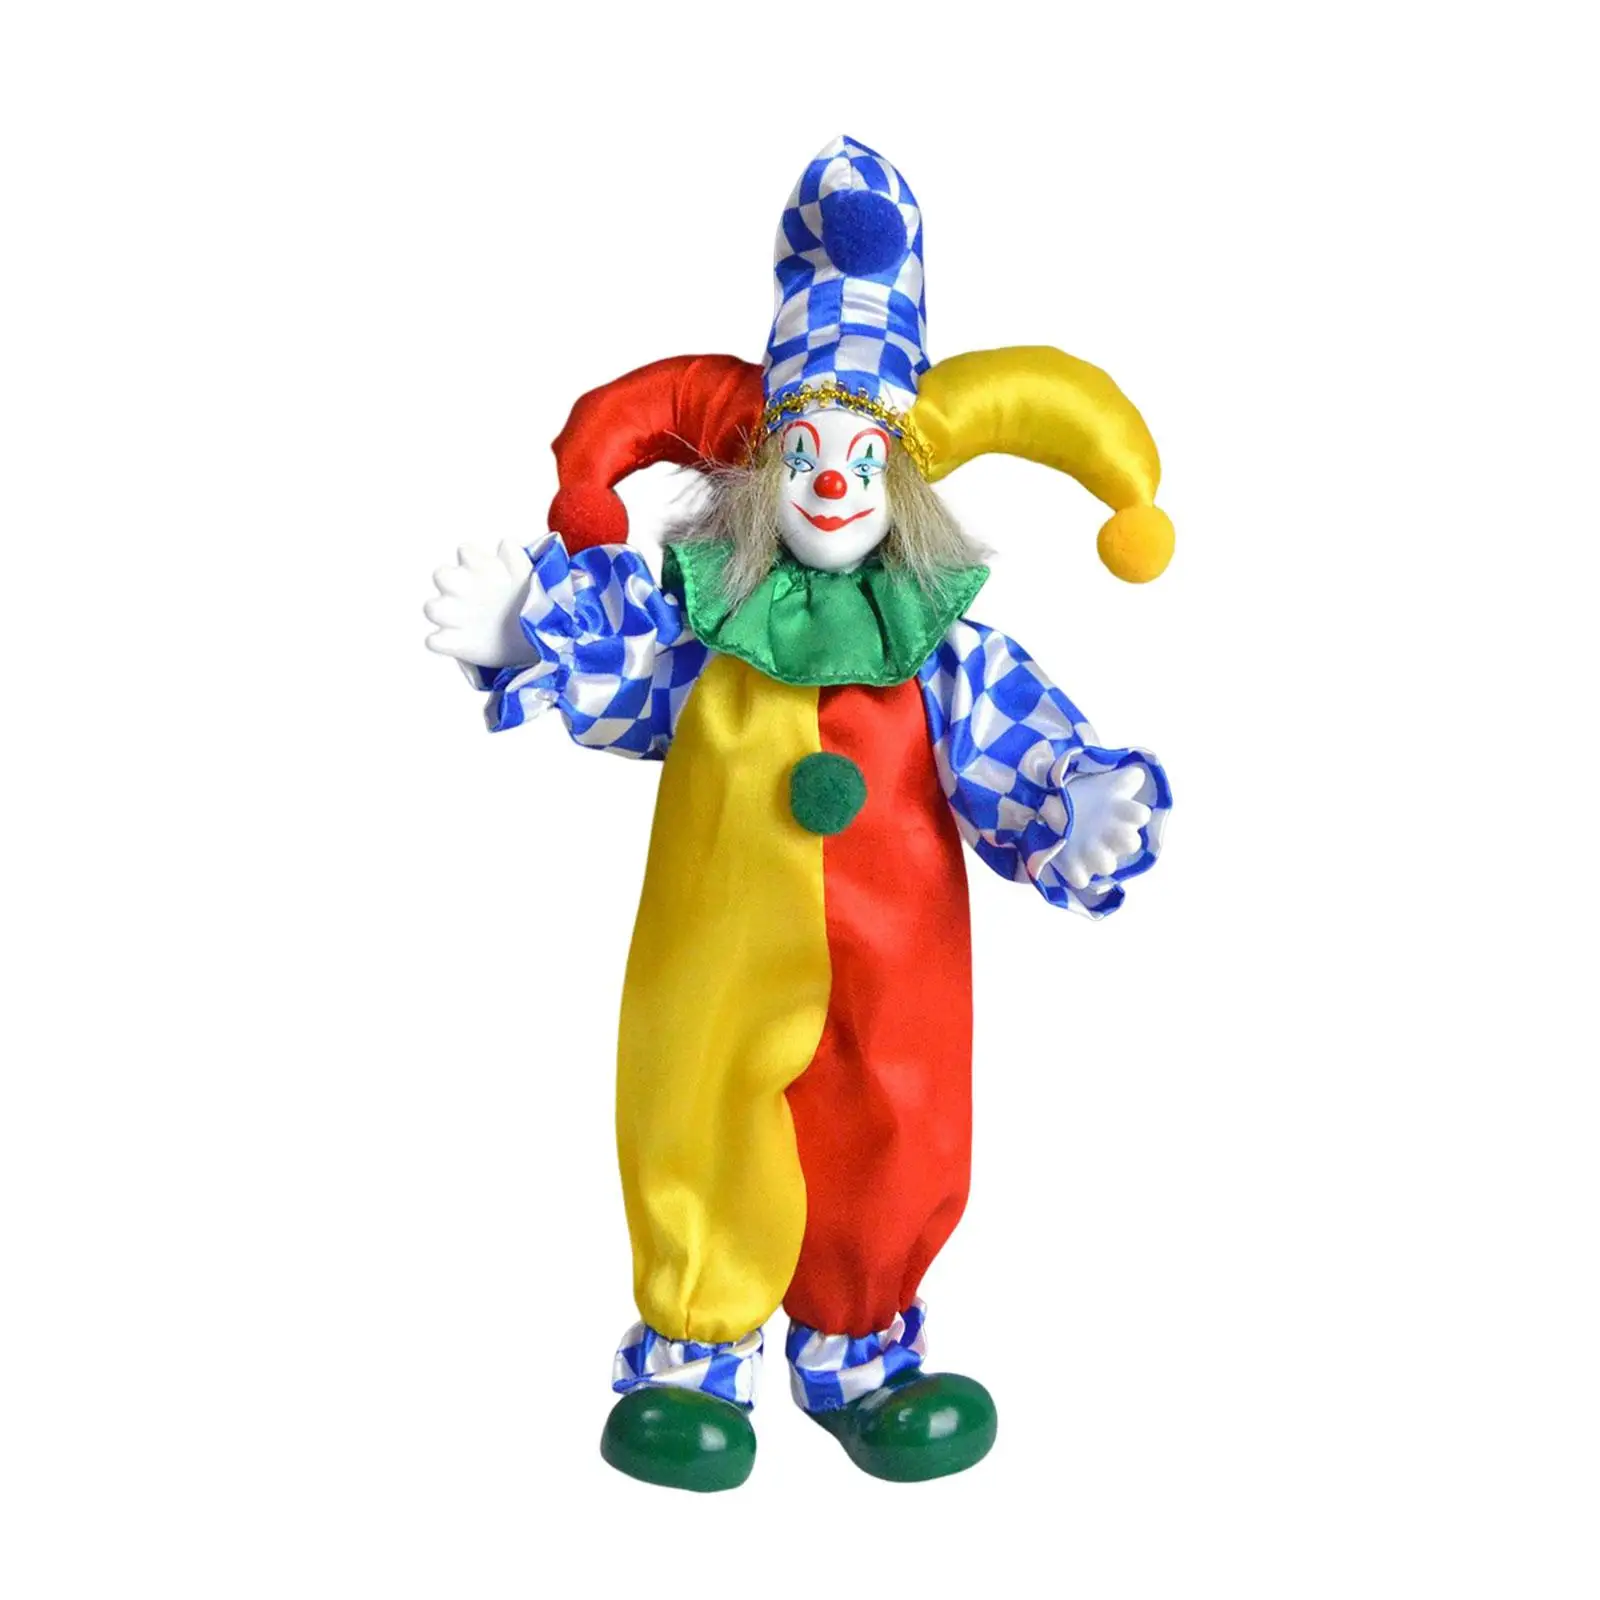 

24cm Clown Doll Figure Porcelain Clown Model Figurine Toy Decorative Movable for Halloween Home Office Bedroom Decoration